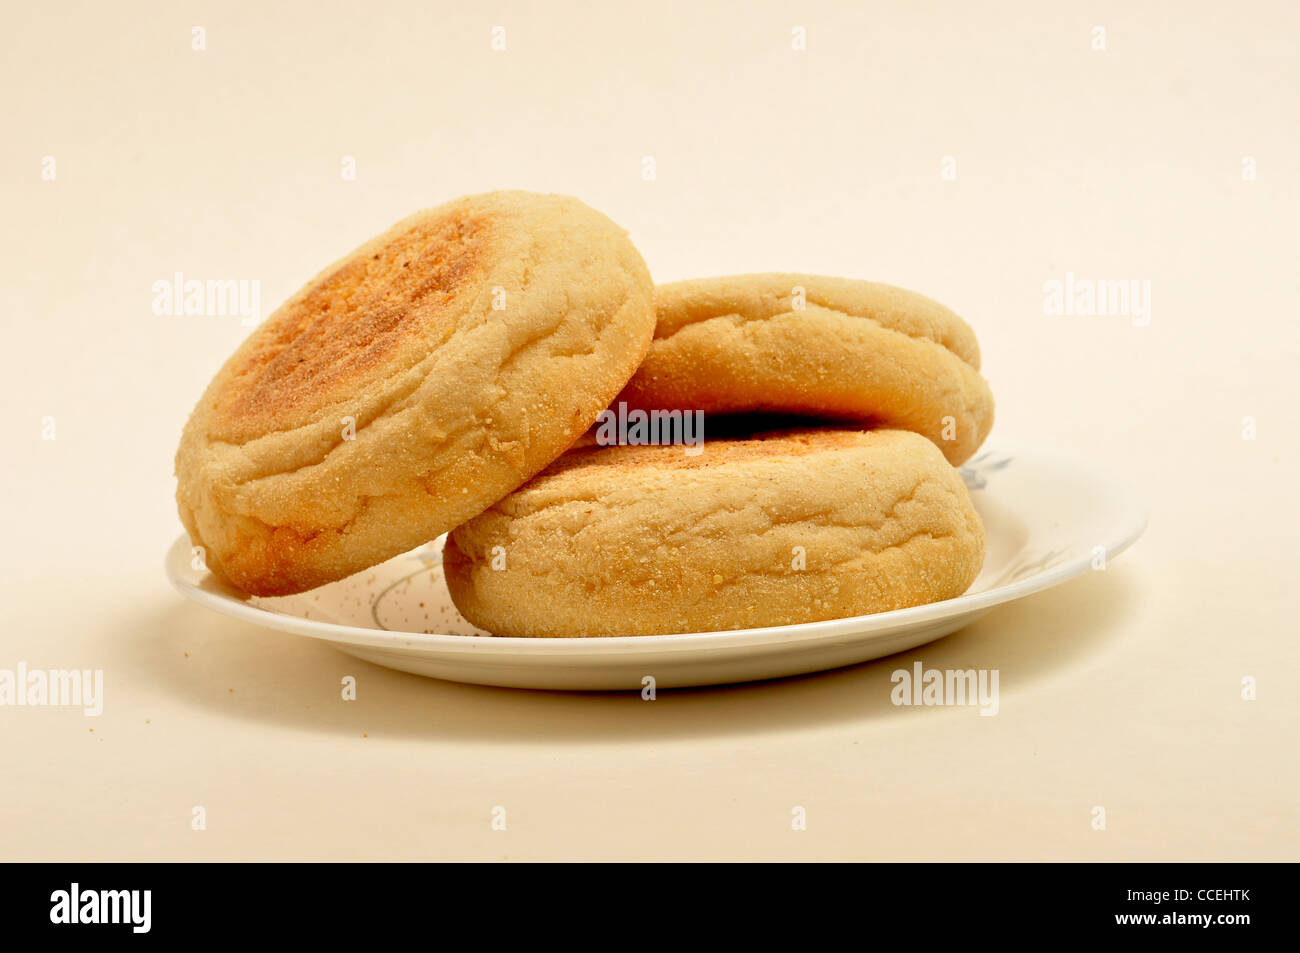 3 English muffins sit on a small saucer on a plain background. Stock Photo